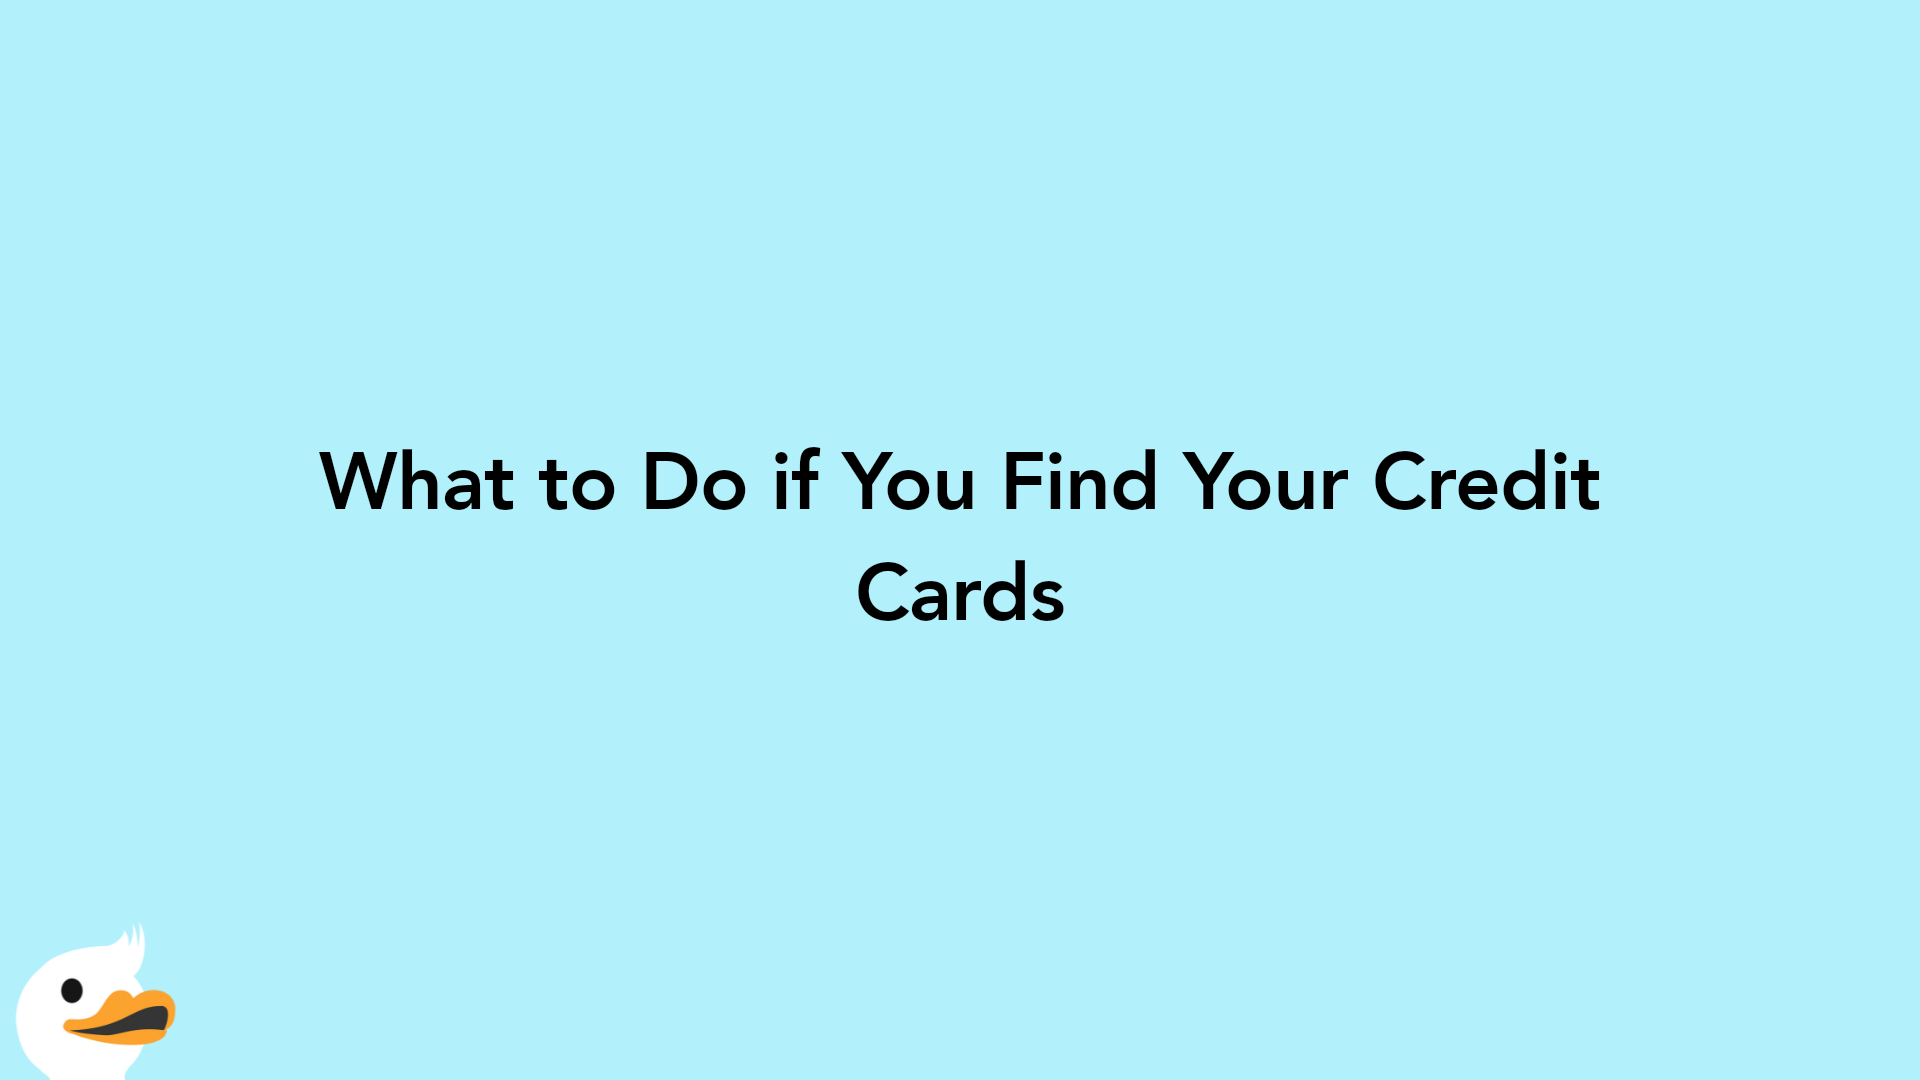 What to Do if You Find Your Credit Cards